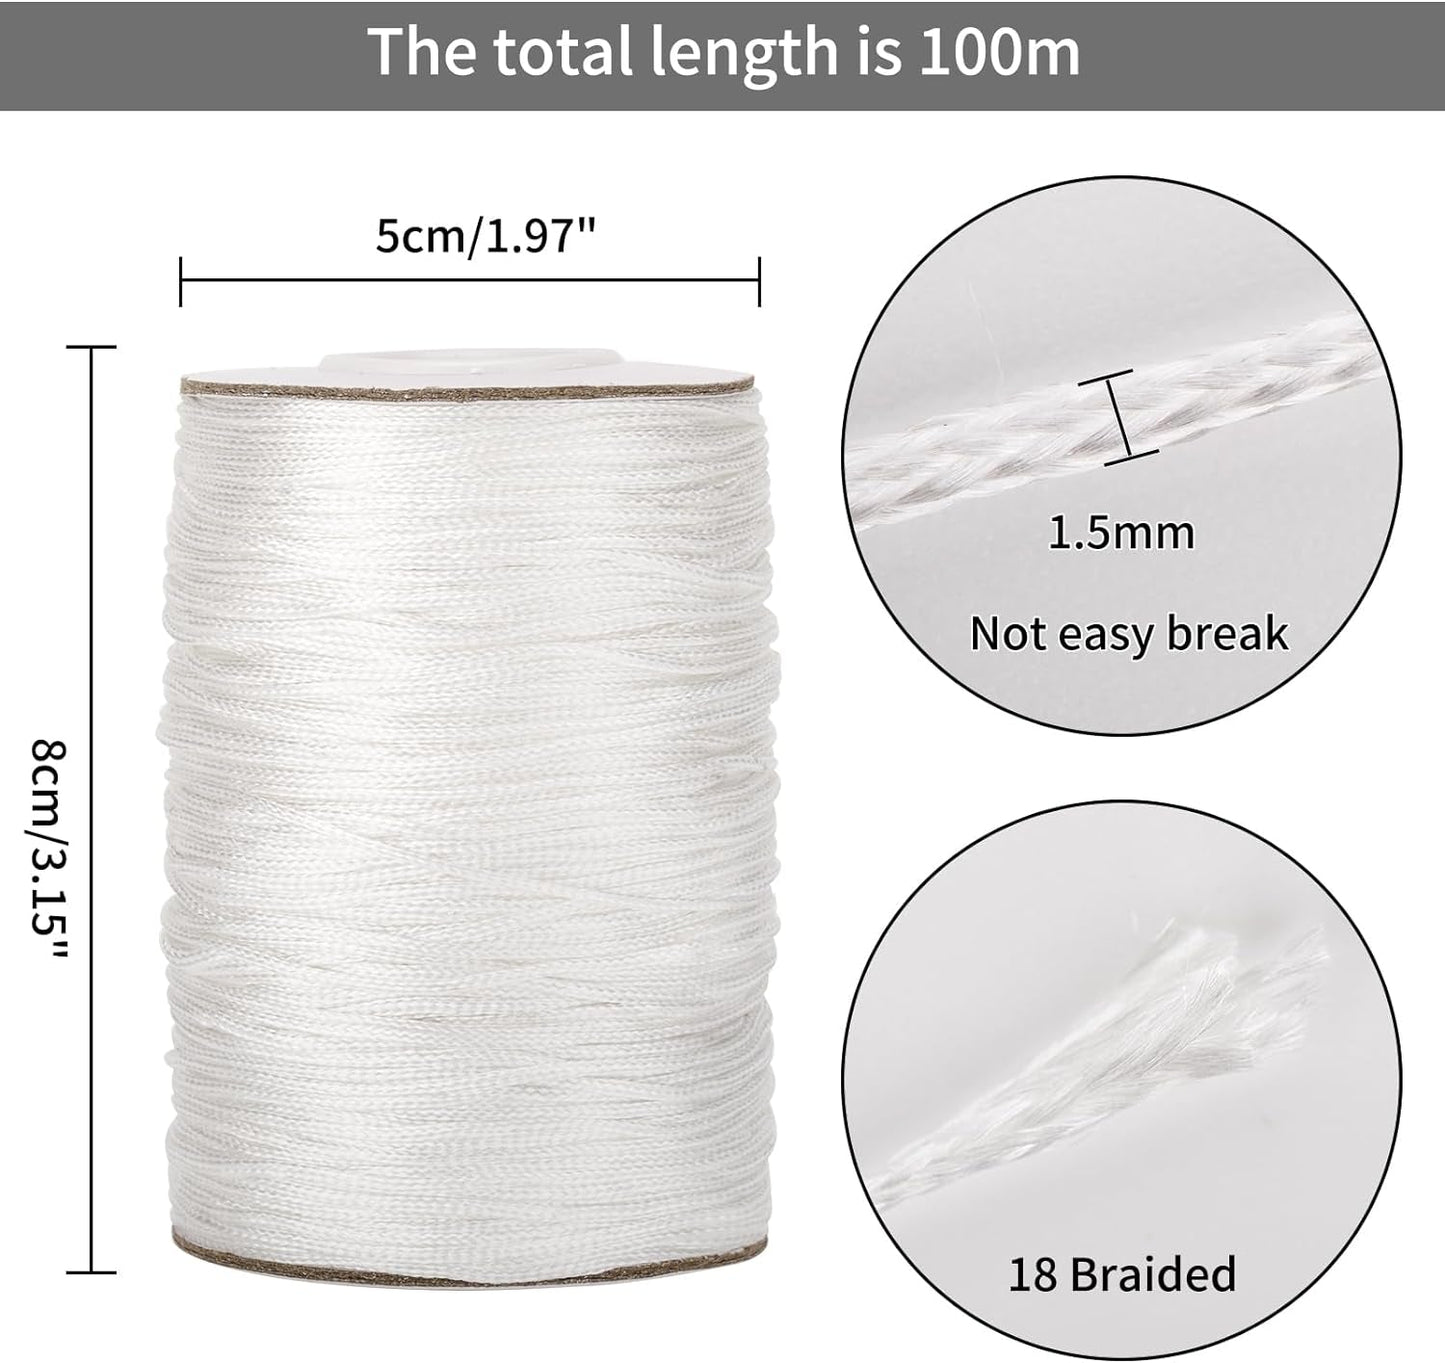 1.5Mm White Nylon Cord Wind Chime String, 110 Yards Braided Lift Shade Cord Replacement, Windows Roman Rollers Repair, Nylon Bracelets String for DIY Crafts, Chinese Knotting, Gardening Plant